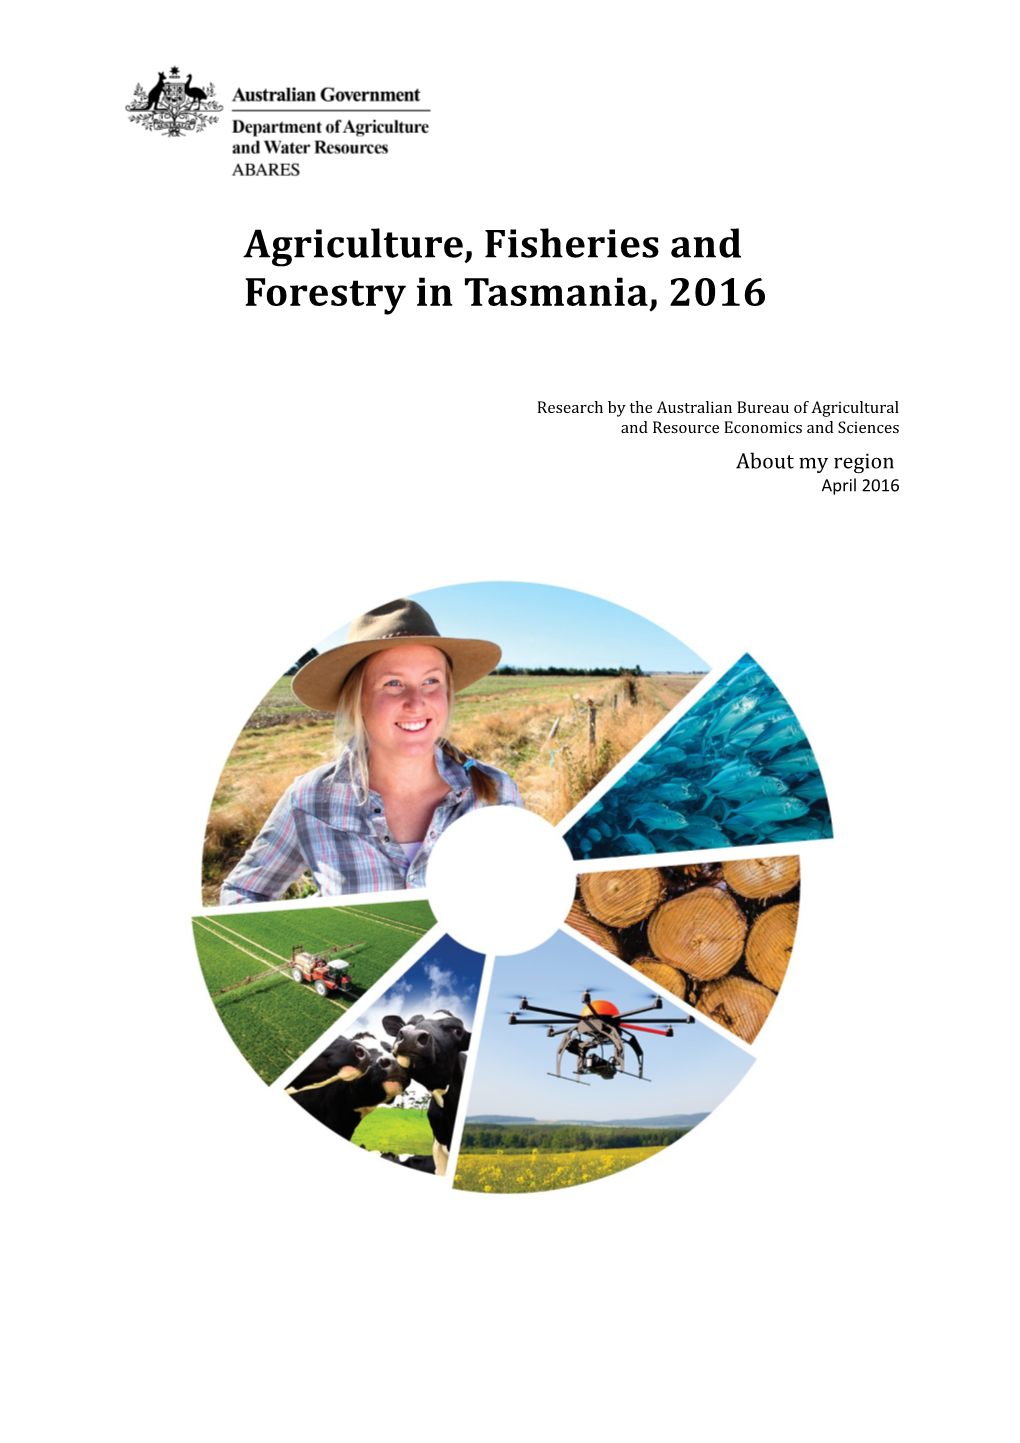 Agriculture, Fisheries and Forestry in Tasmania, 2016